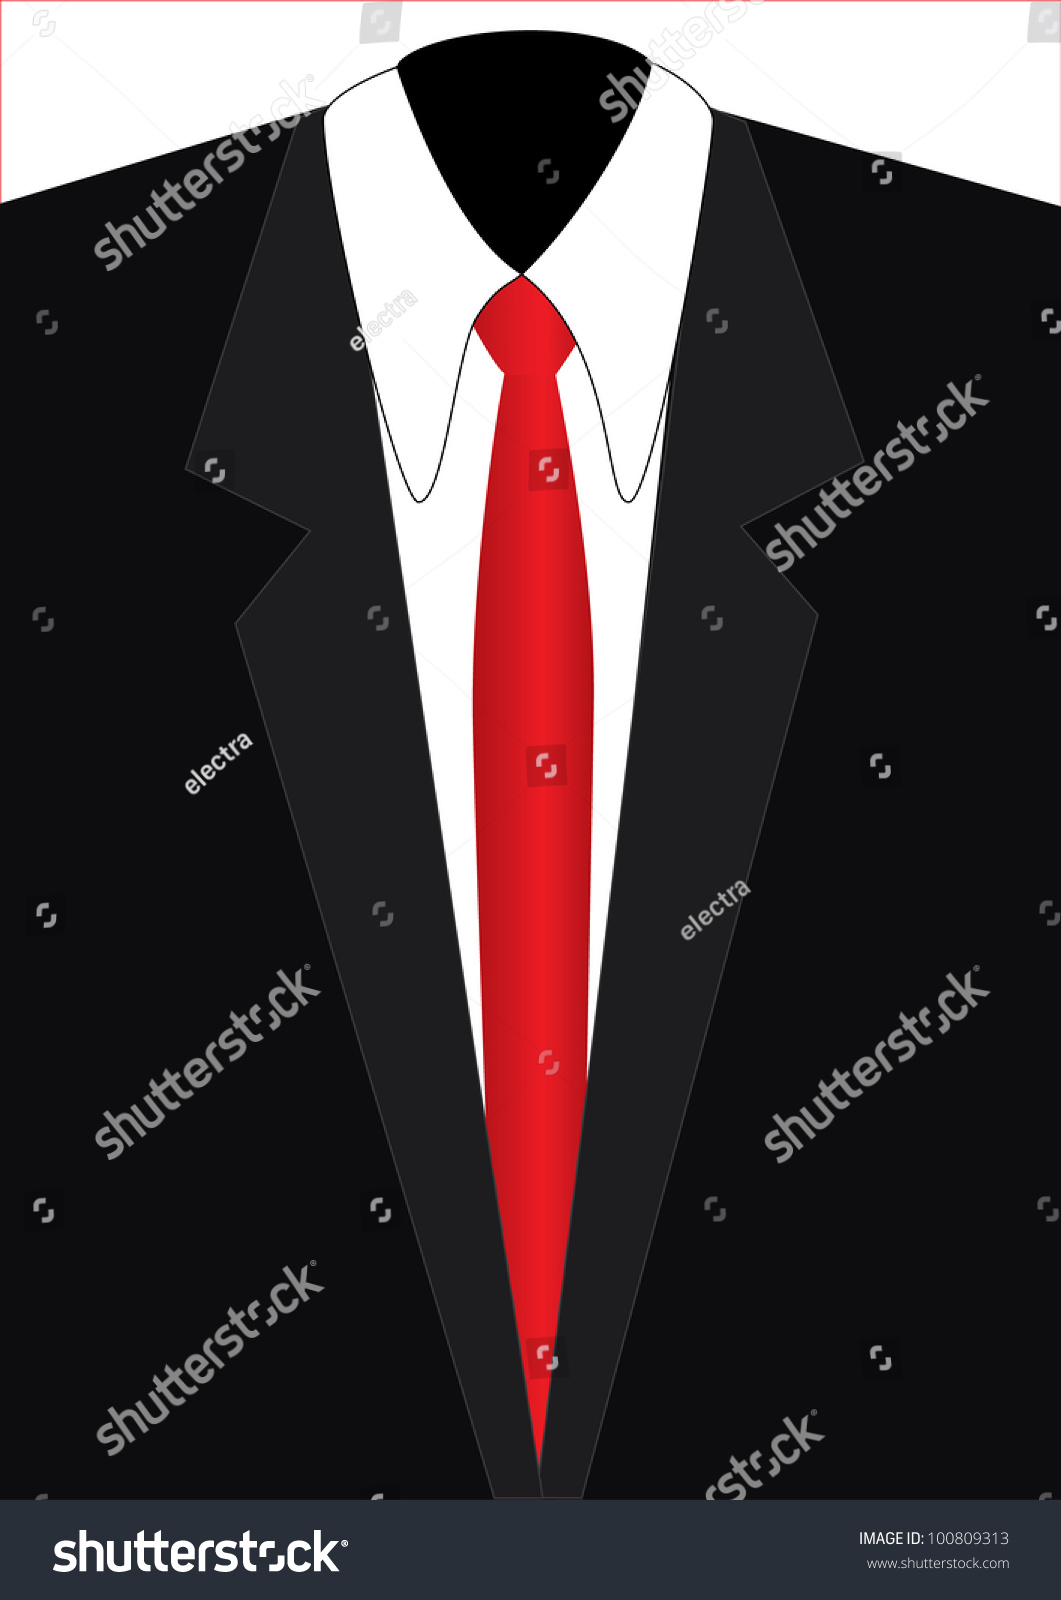 Male Suit Black With White Shirt And Red Tie Stock Vector Illustration